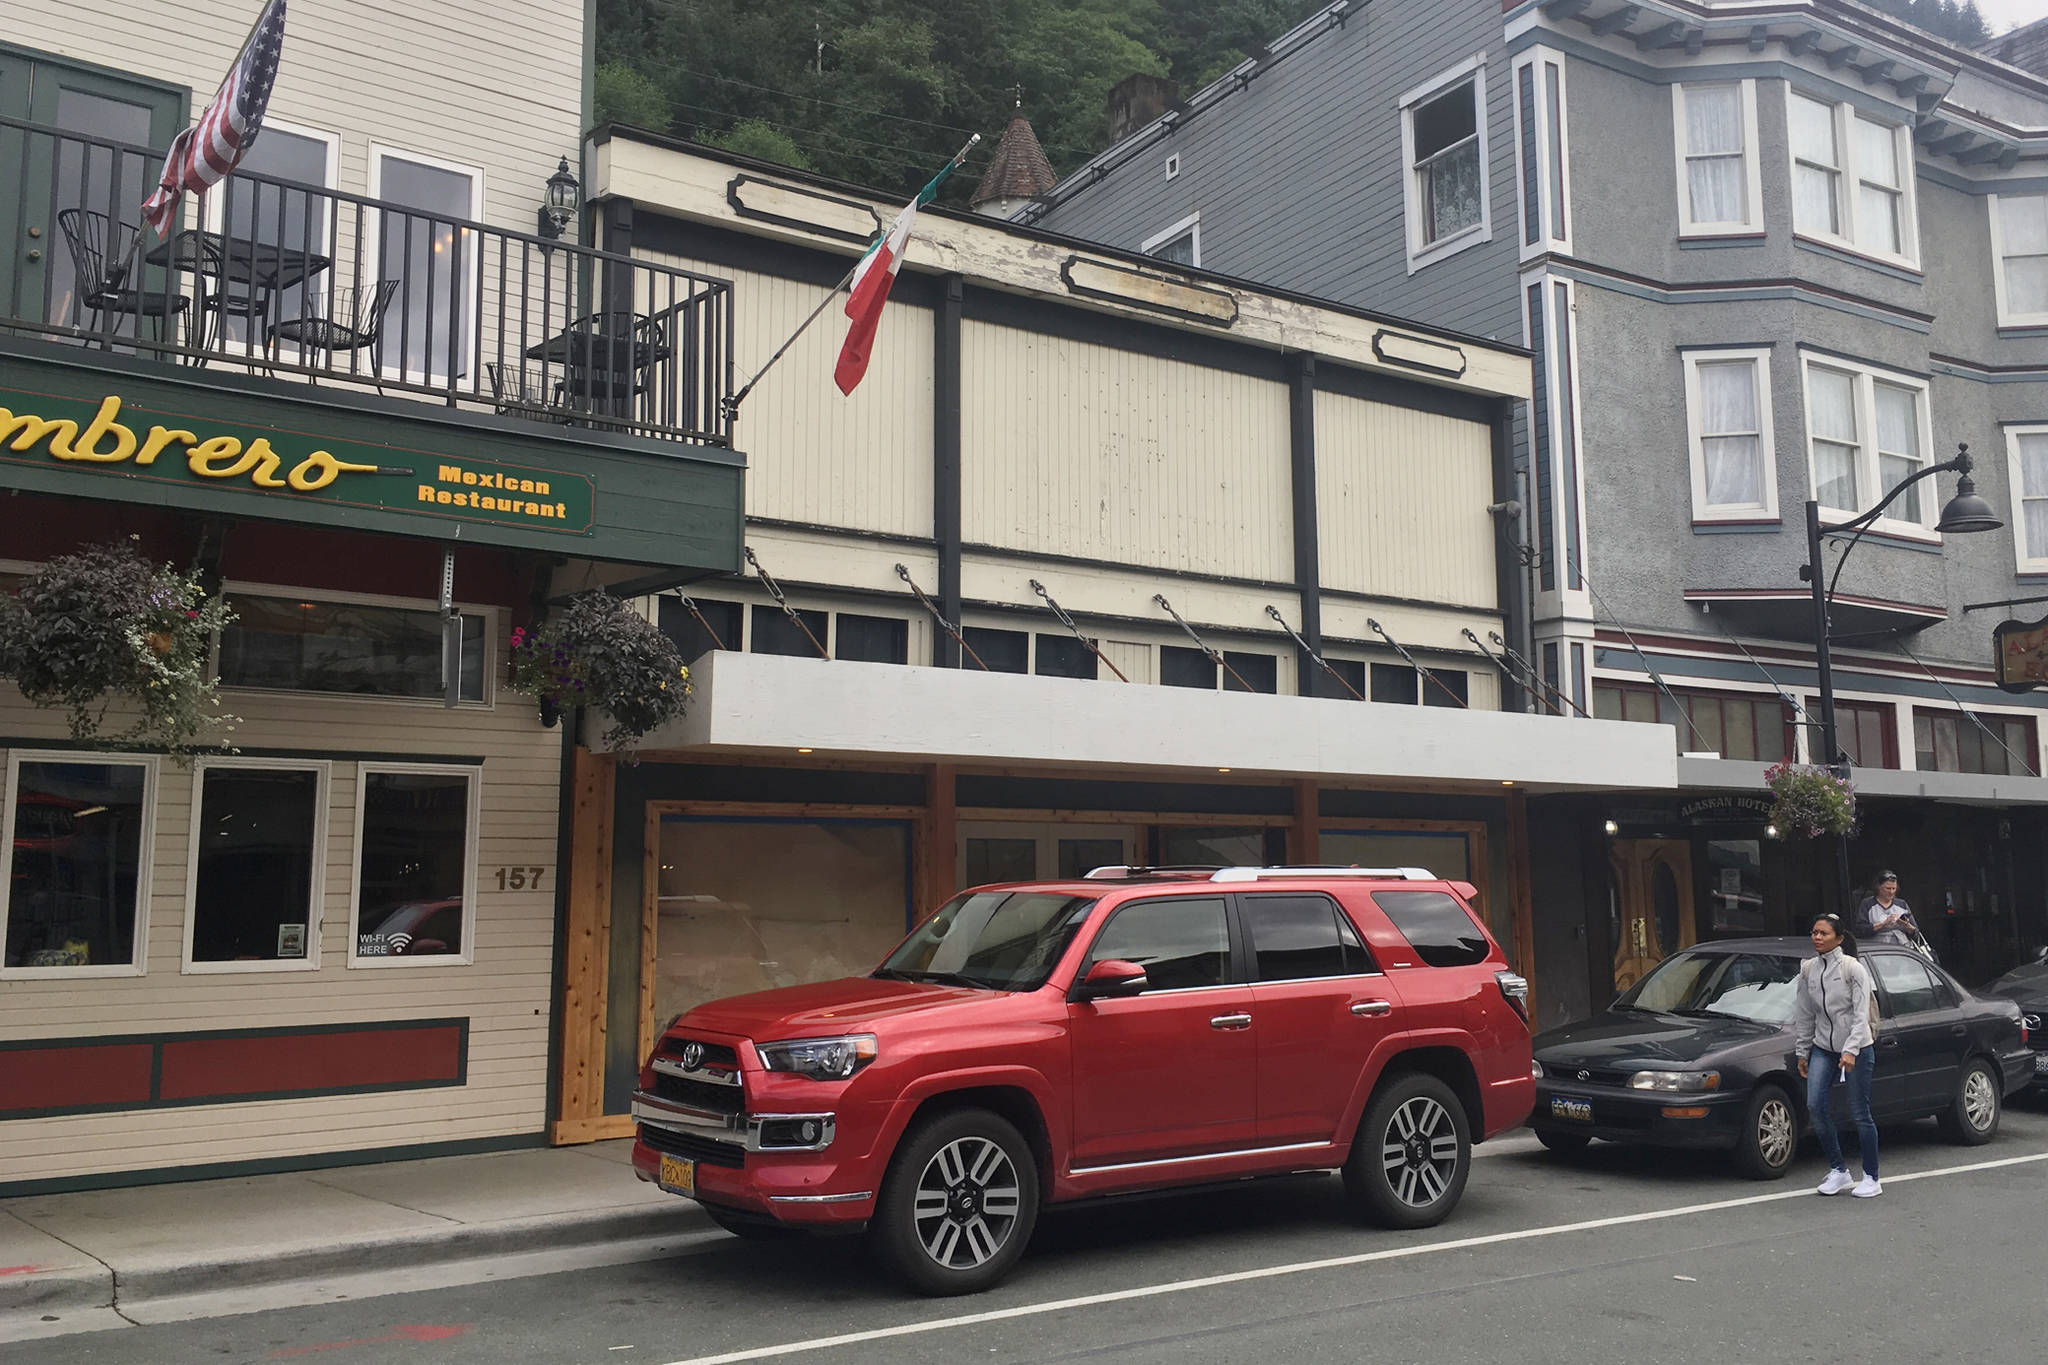 This storefront at 159 S. Franklin Street, seen Friday, Aug. 17, 2018, has been approved by the Alaska Marijuana Control Board as the site of the city’s newest retail marijuana shop. (James Brooks | Juneau Empire)